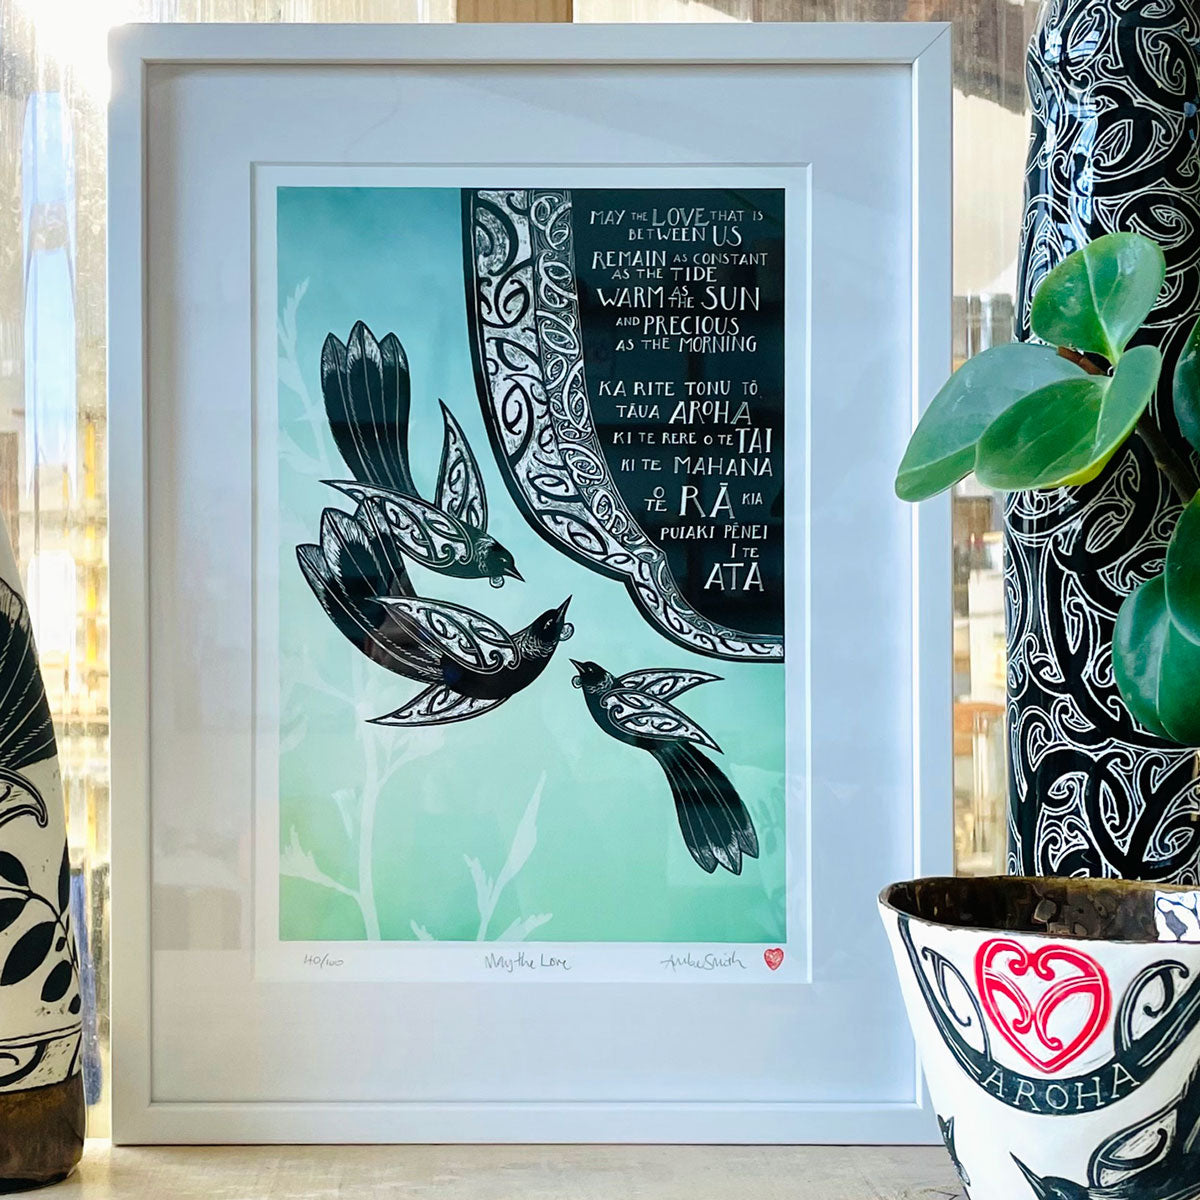 Framed, in studio, May the Love nz art print. Maori art design tui birds and the words May the love that is between us remain as constant as the tide, as warm as the sun, and as precious as the morning in te reo maori and english translation. A blessing karakia print by Amber Smith New Zealand artist